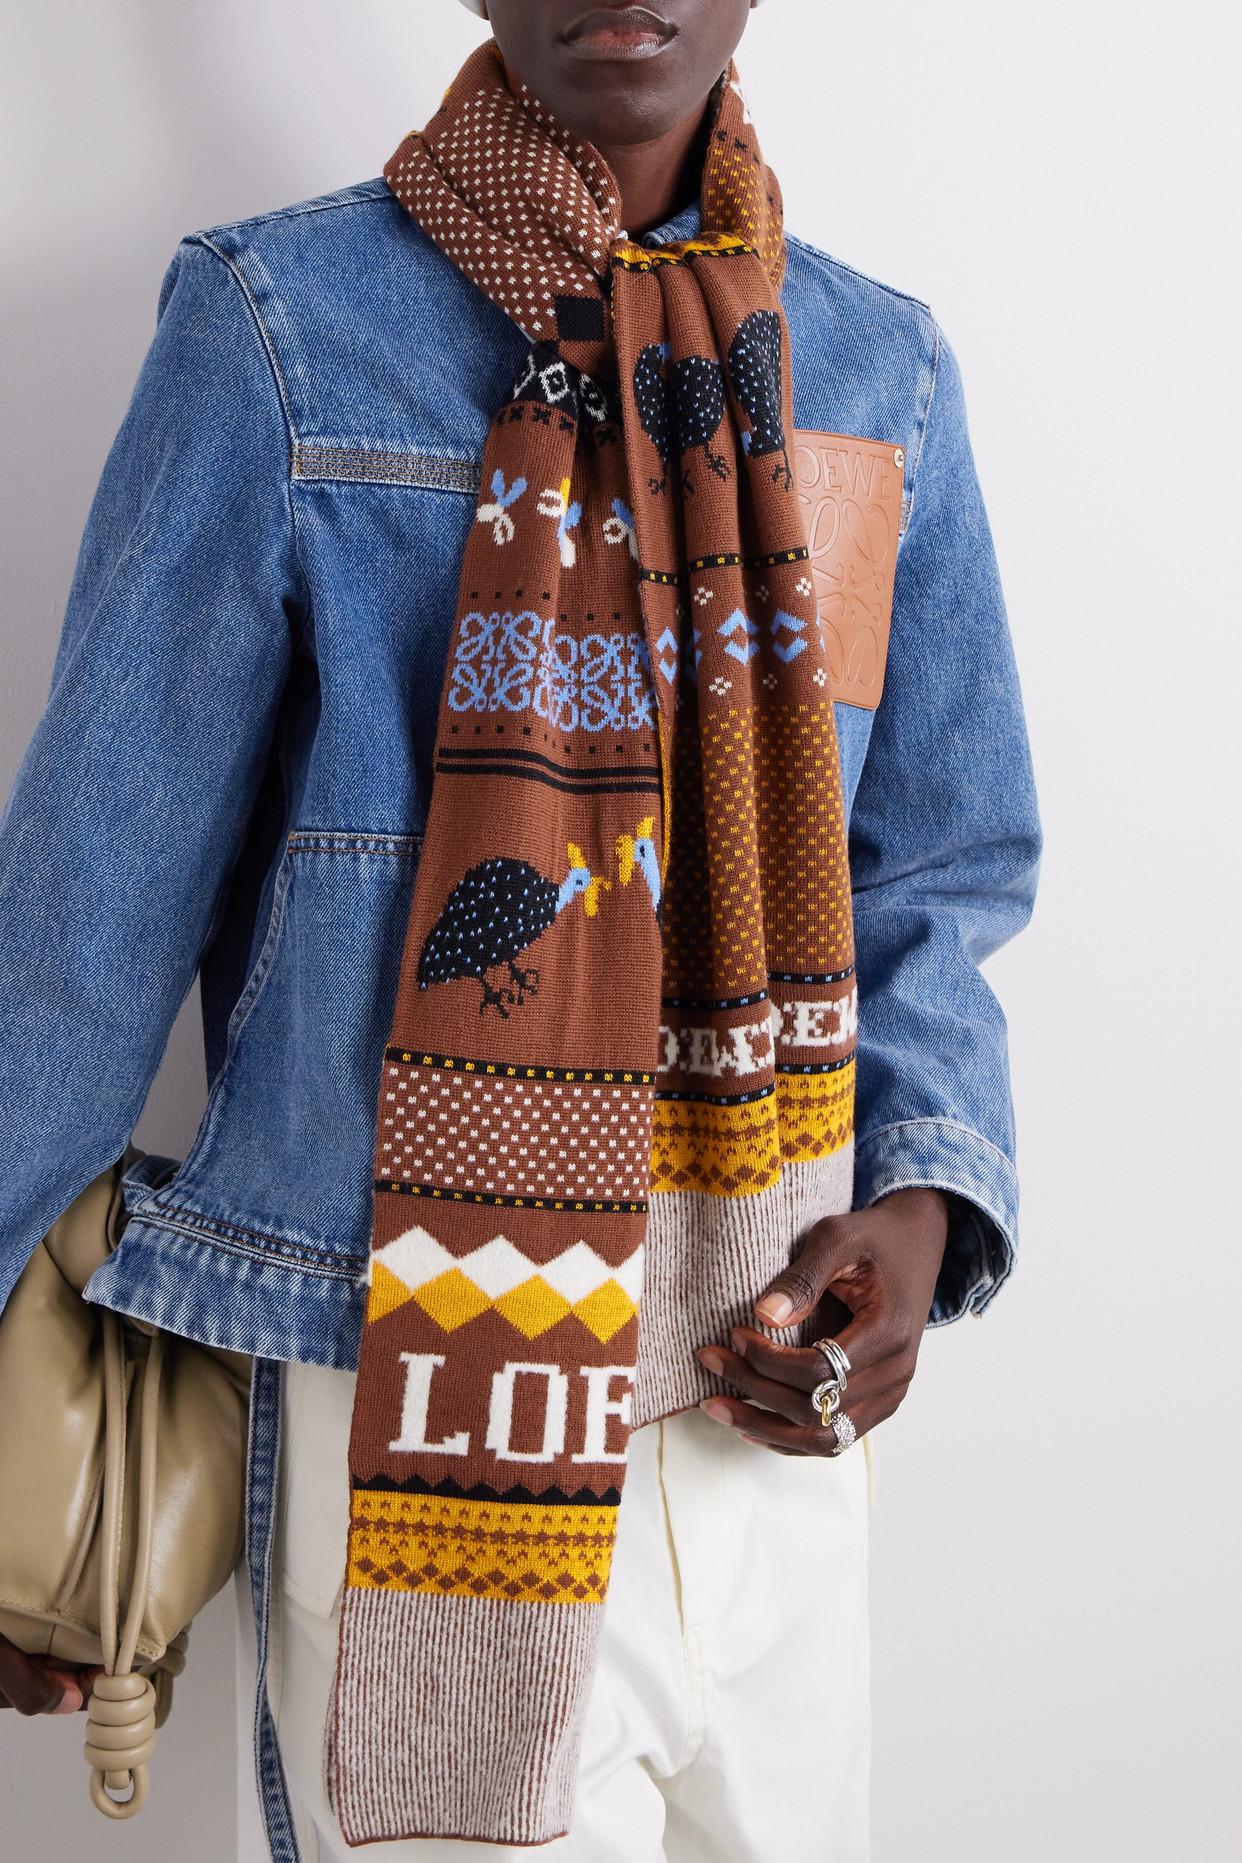 LOEWE Fringed intarsia wool and cashmere-blend scarf